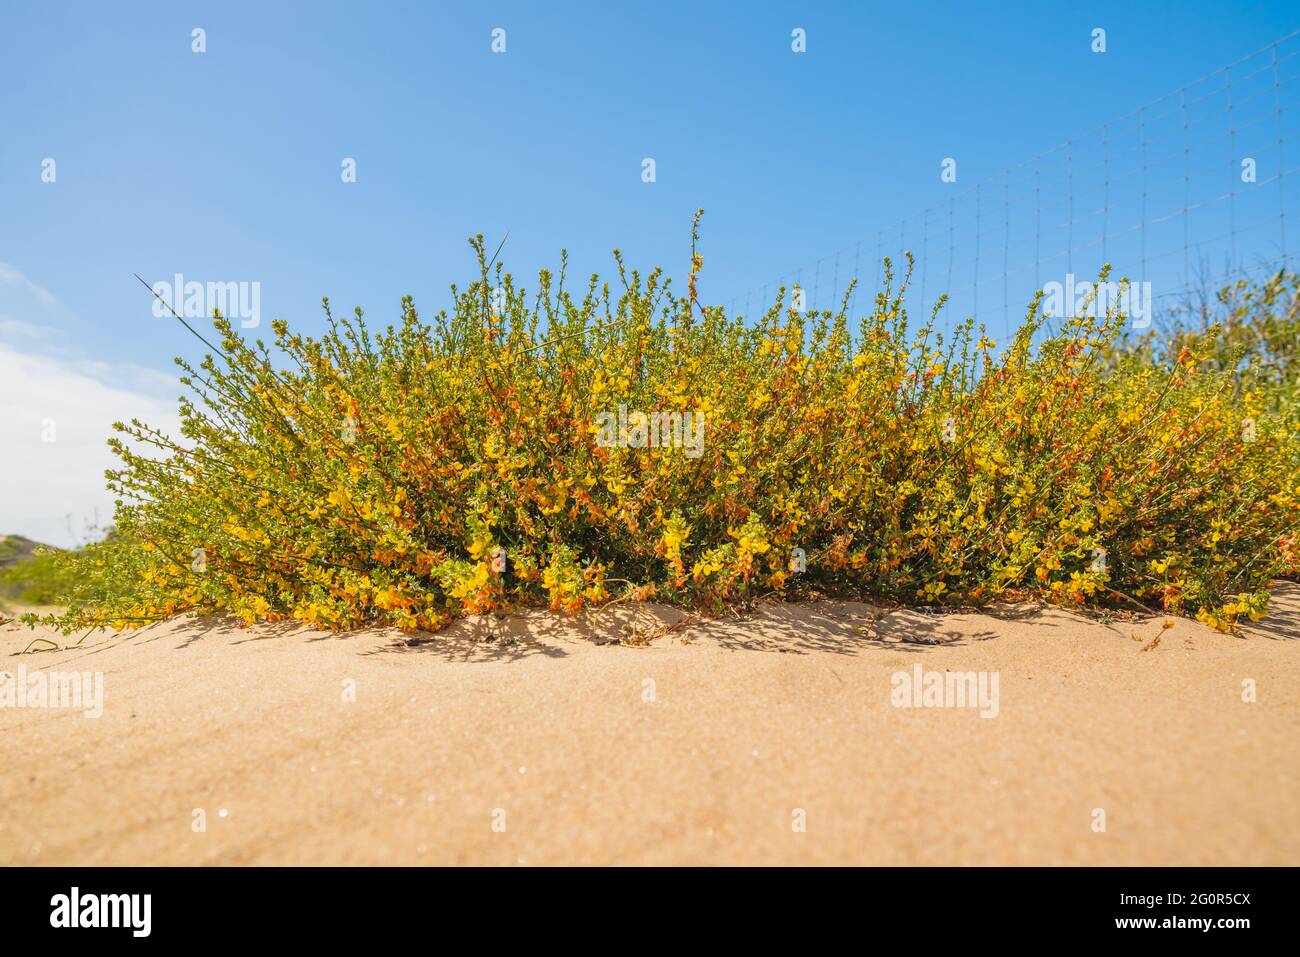 Sand dunes and deerweed plant. Deerweed (Lotus scoparius) bright-yellow flowers, California native, in bloom in late spring Stock Photo